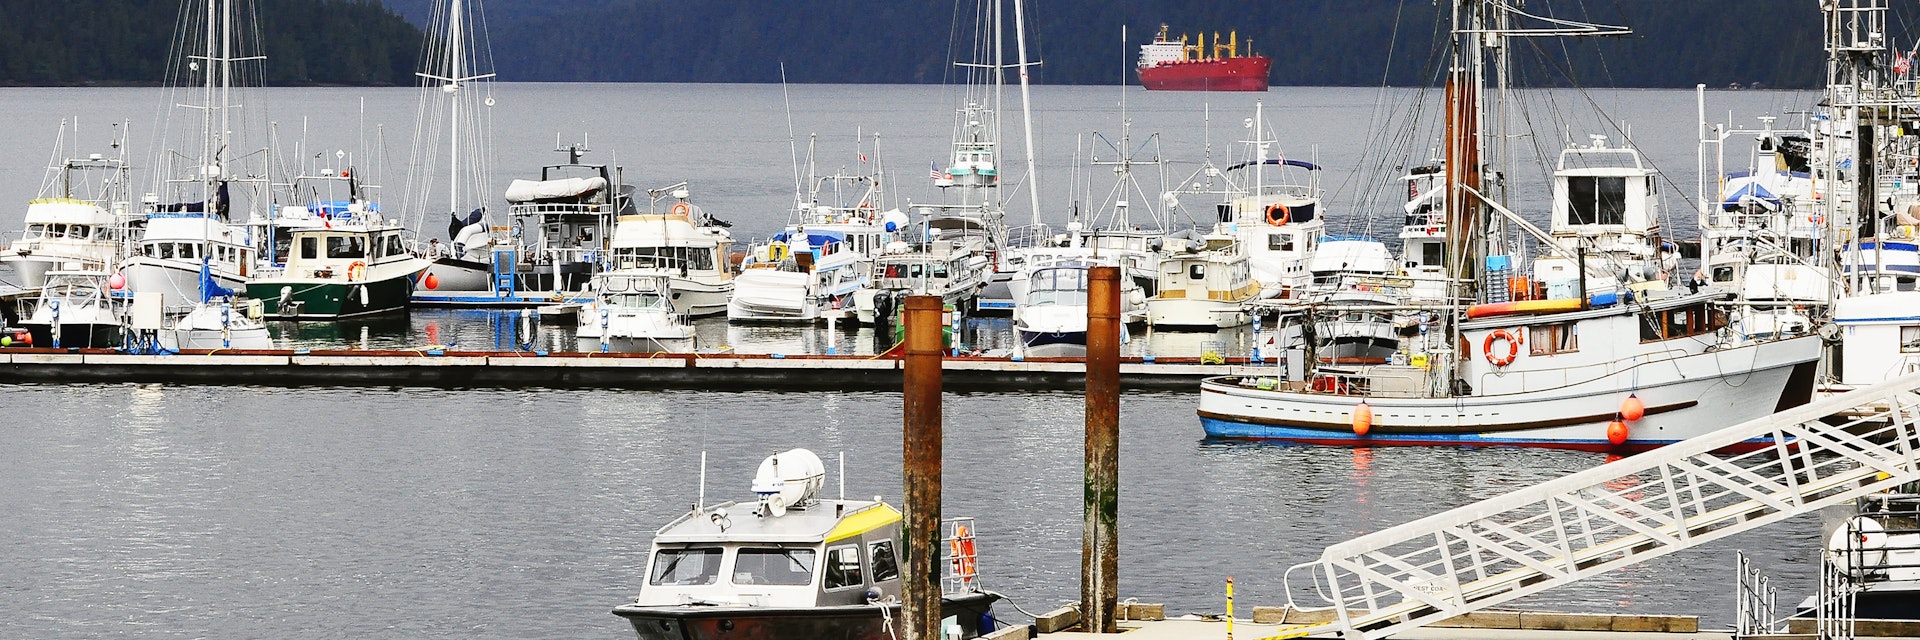 Boats docked at Prince Rupert harbour on a cloudy day.